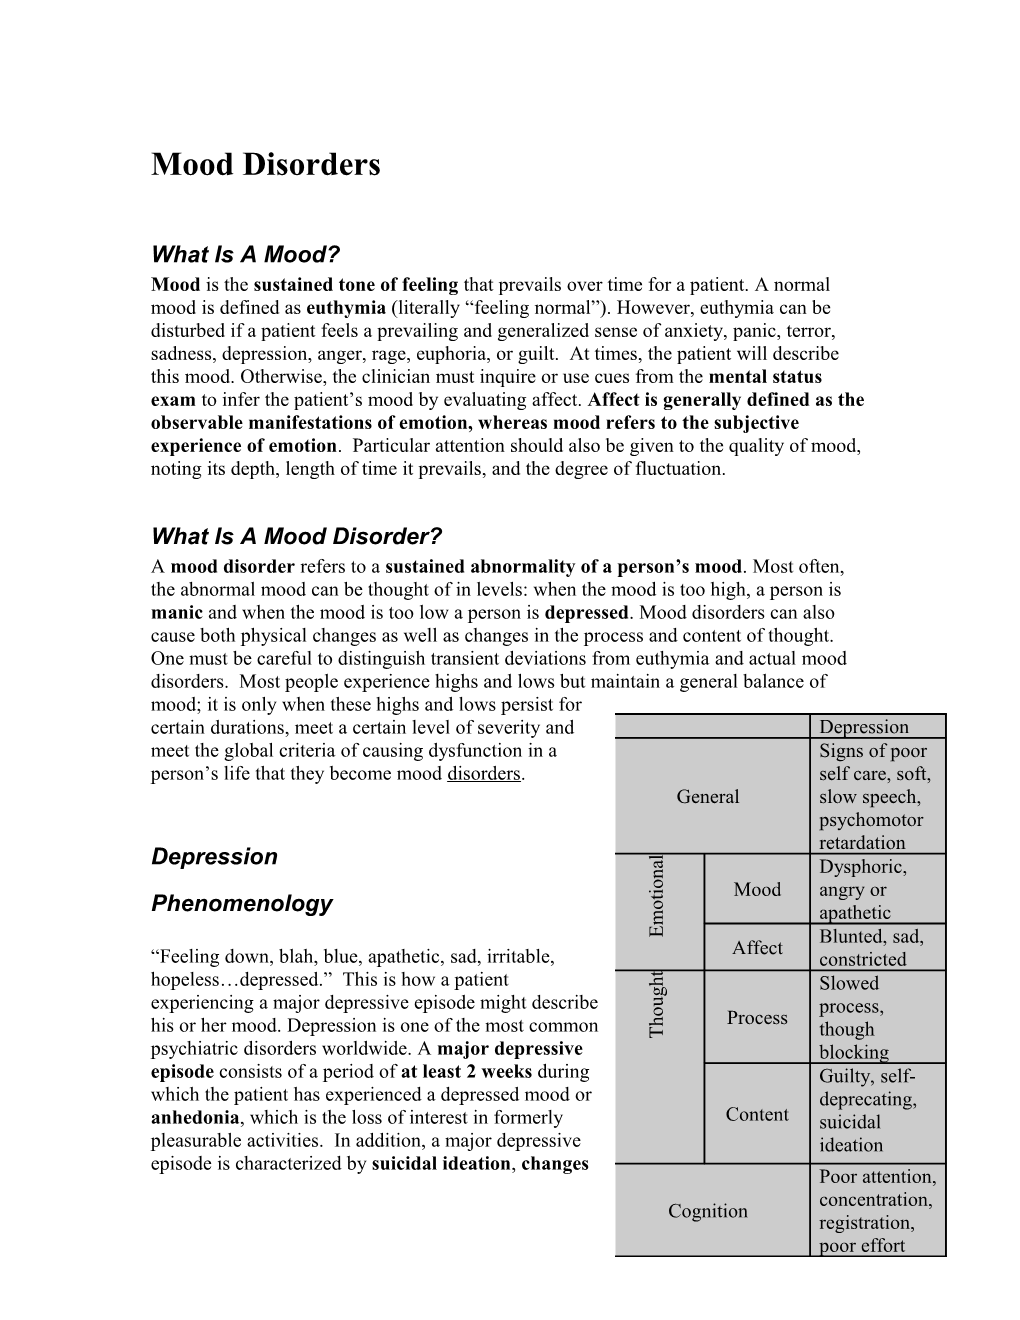 Mood Disorders, Page 14 of 30